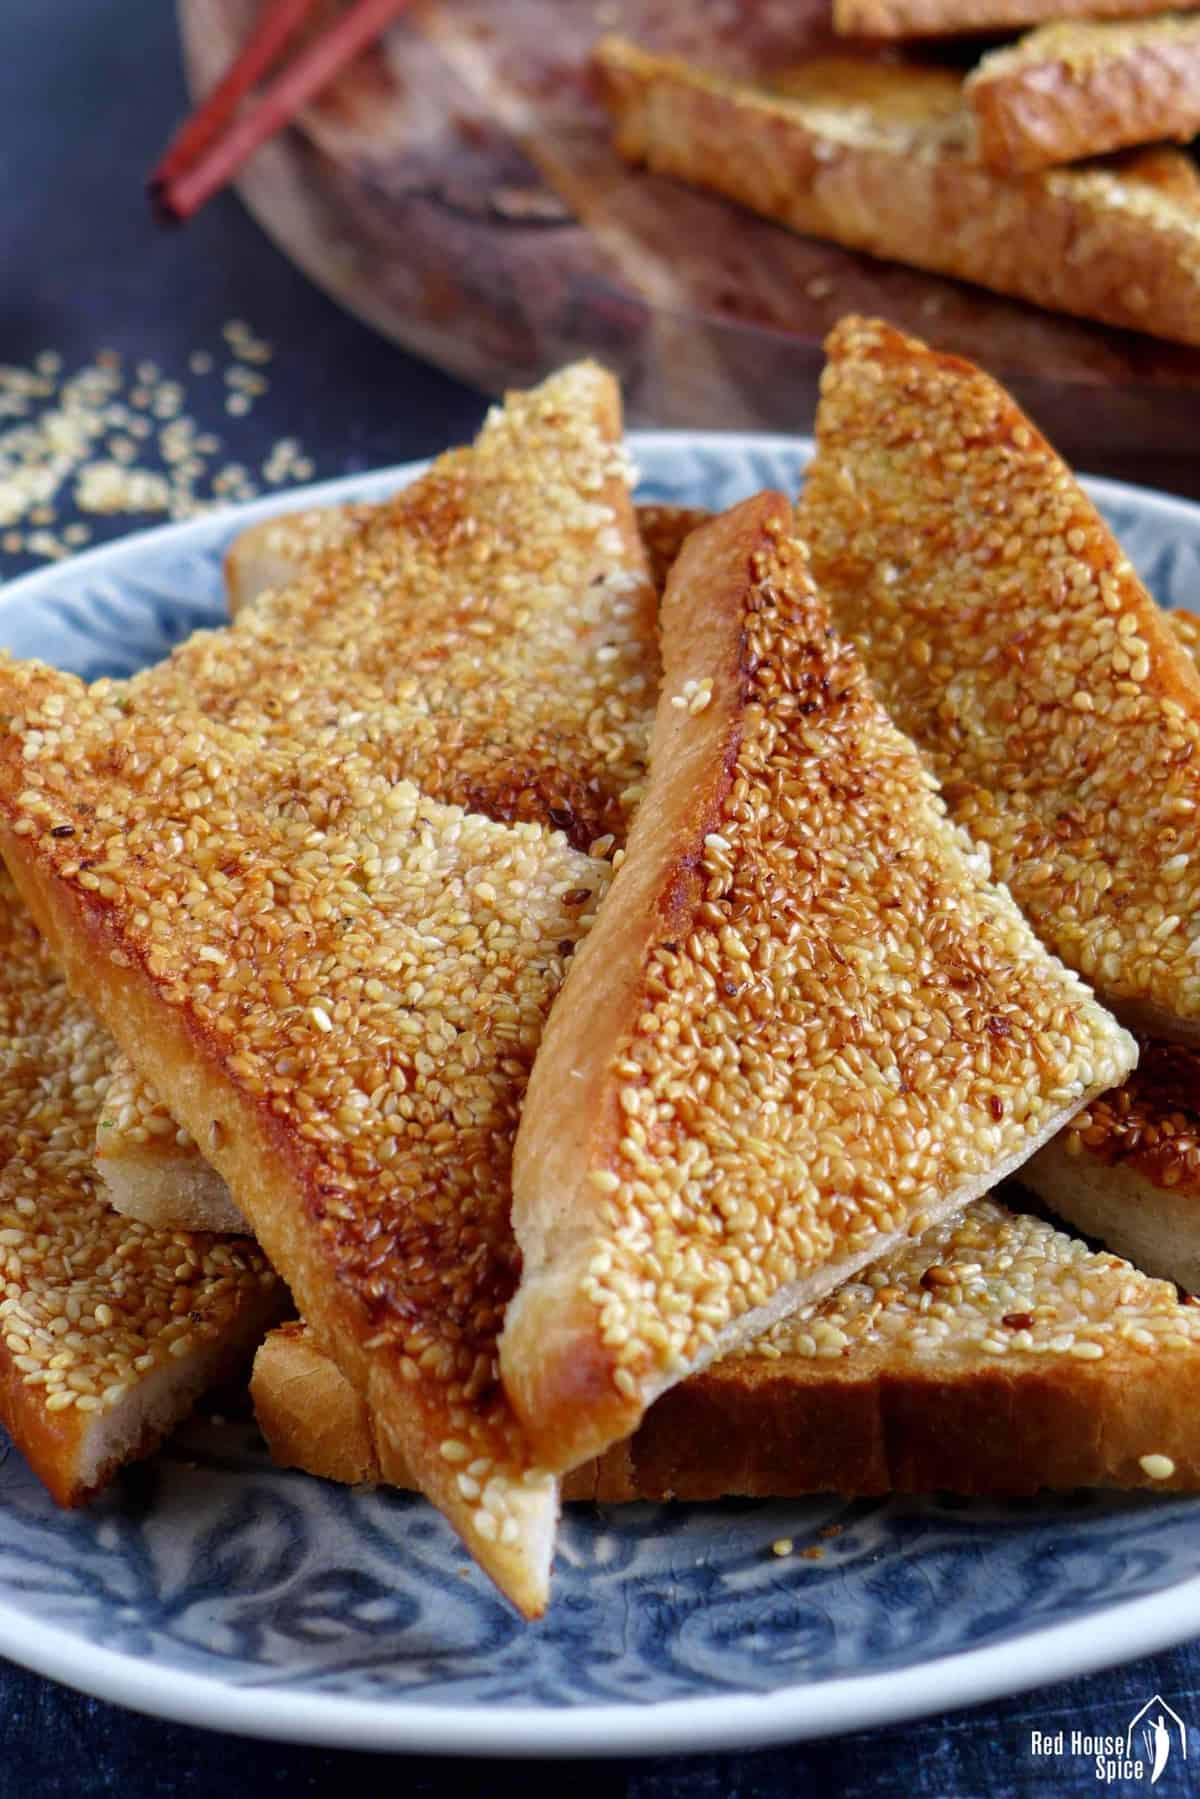 Shrimp toast covered with sesame seeds